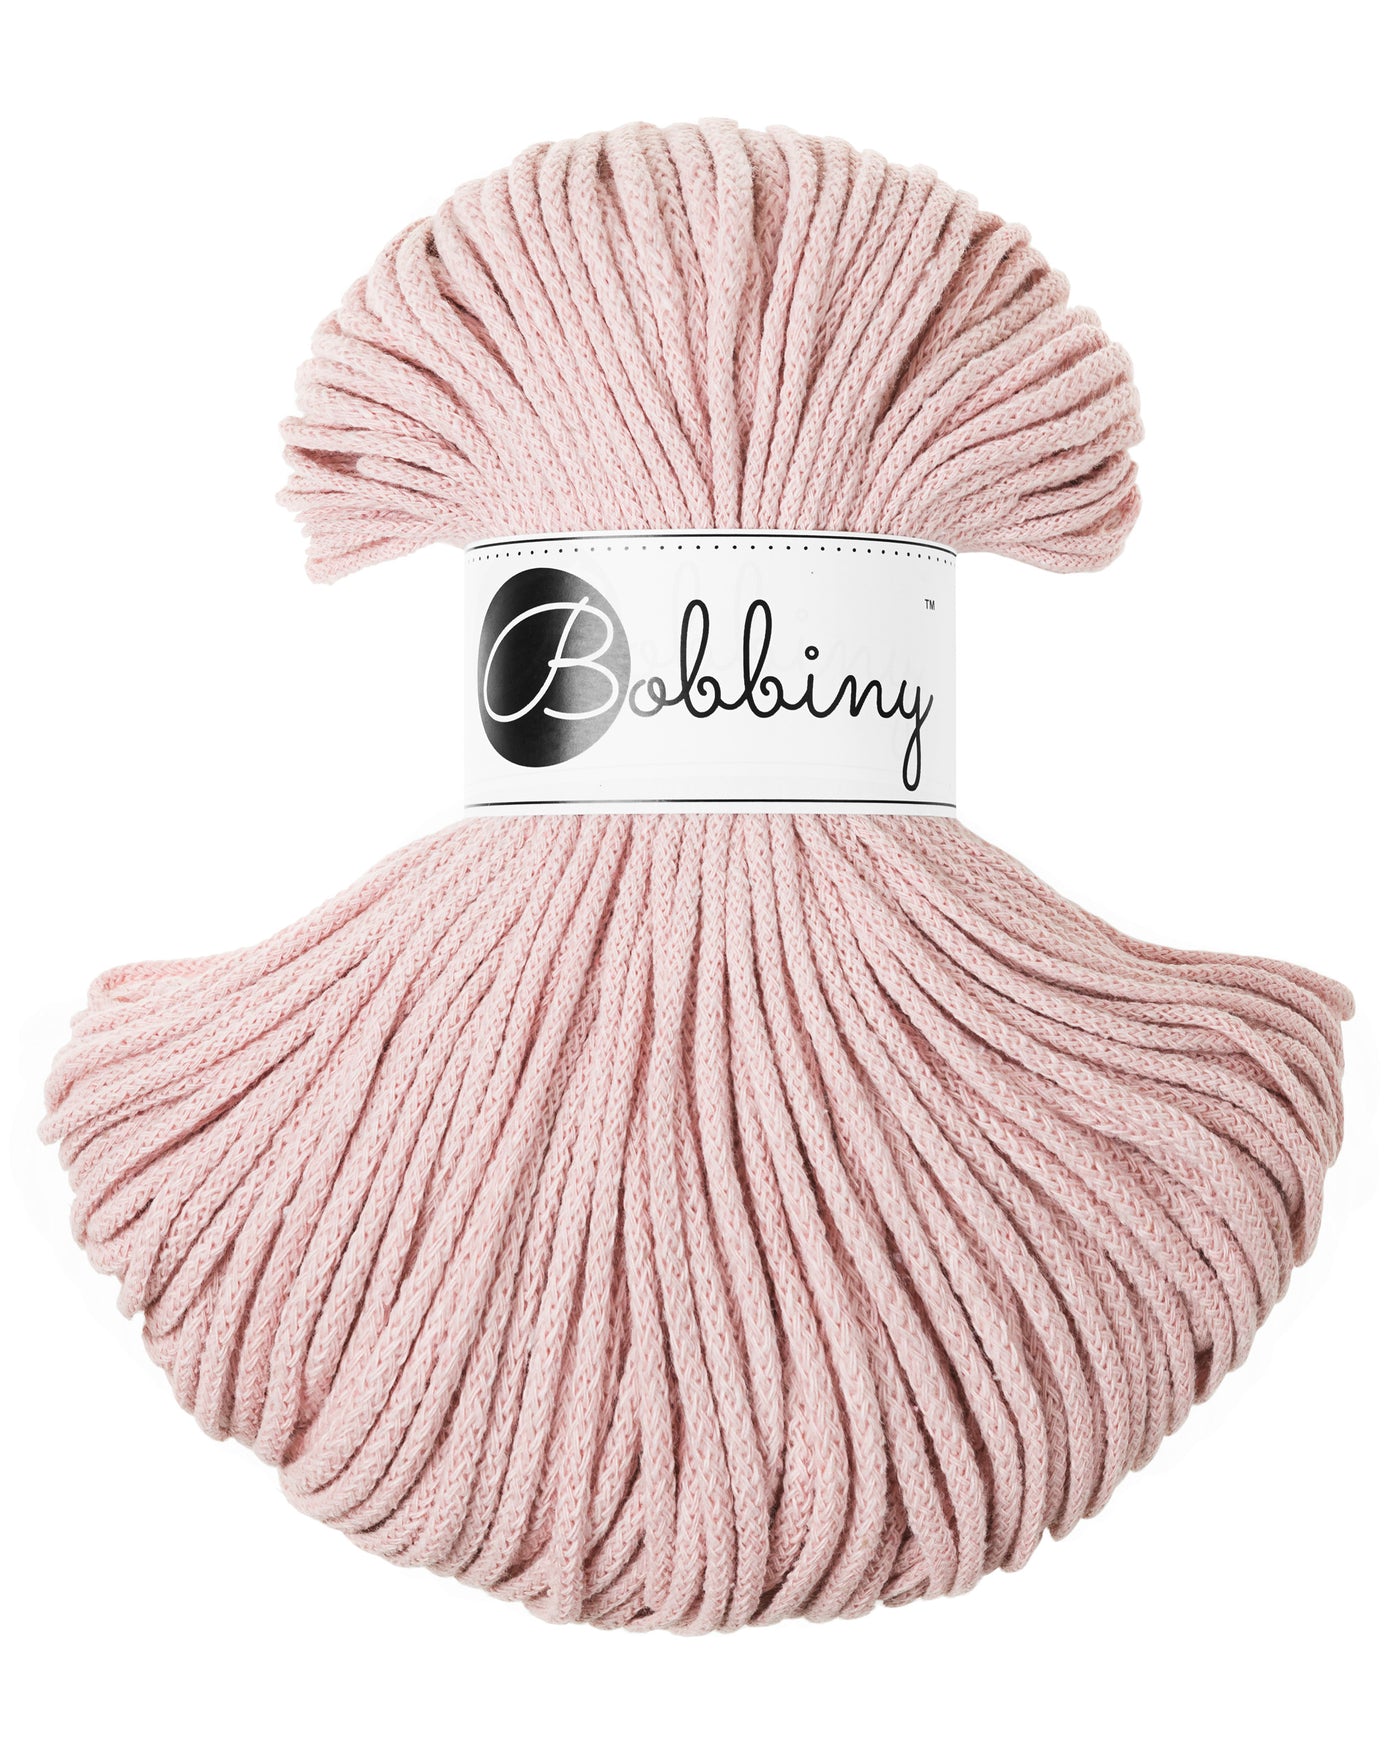 These beautiful Bobbiny cords are made in Poland from 100% recycled cottons and are non-toxic, certified safe for children and meet certified worldwide textile standards.  Shown here is the gorgeous new shade of 'Pastel Pink'  3mm Diameter  100 metres Length  Recommended for use with 8-10mm crochet or knitting needles.  Cotton inner and outer layers, perfect for use with Macrame, Crochet or Knitting.